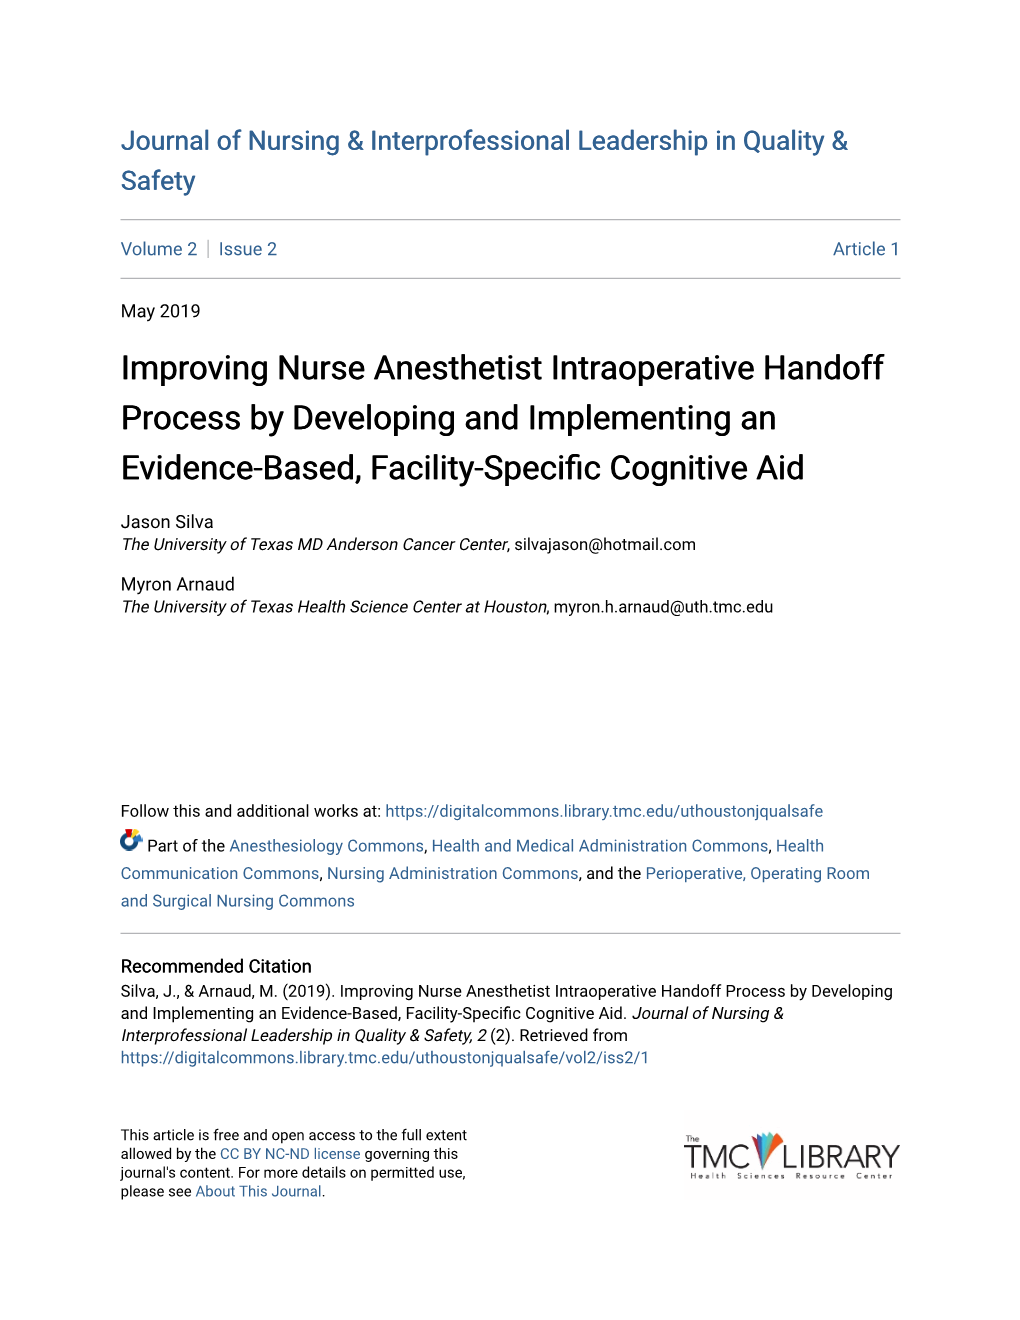 Improving Nurse Anesthetist Intraoperative Handoff Process by Developing and Implementing an Evidence-Based, Facility-Specific Cognitive Aid